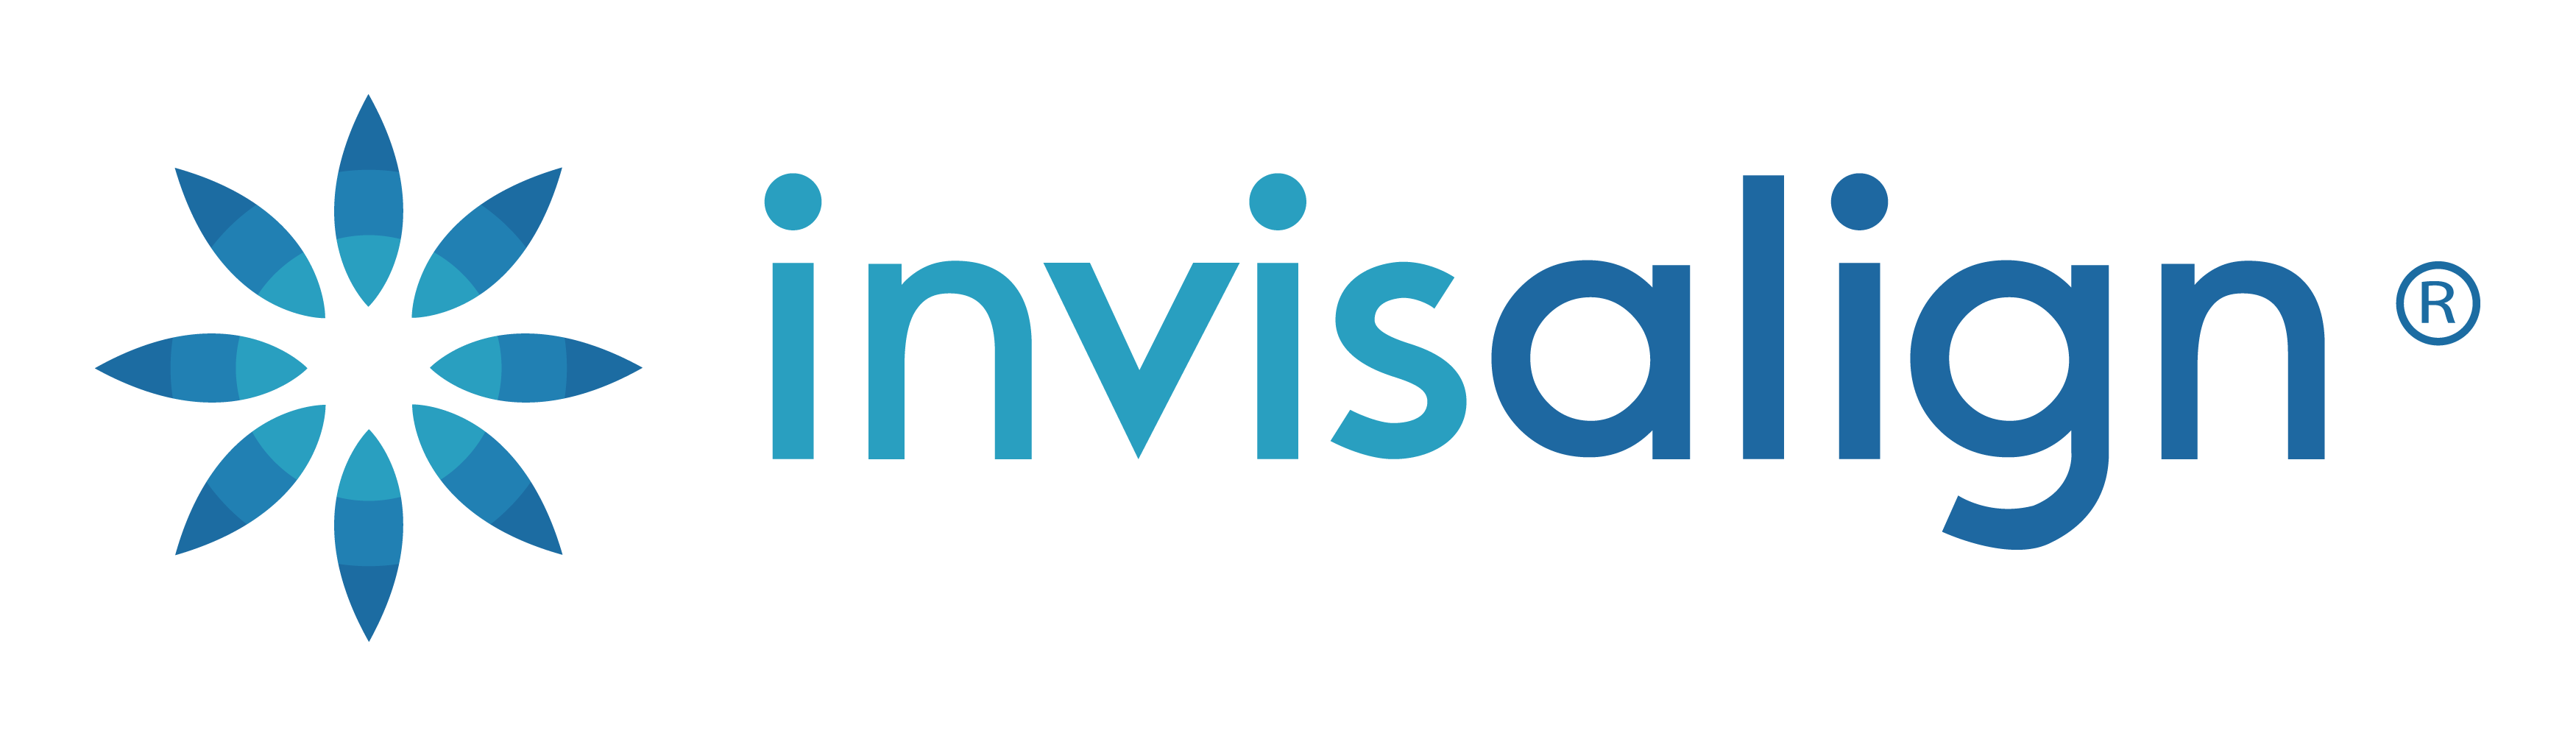 Invisalign logo on the display of the website